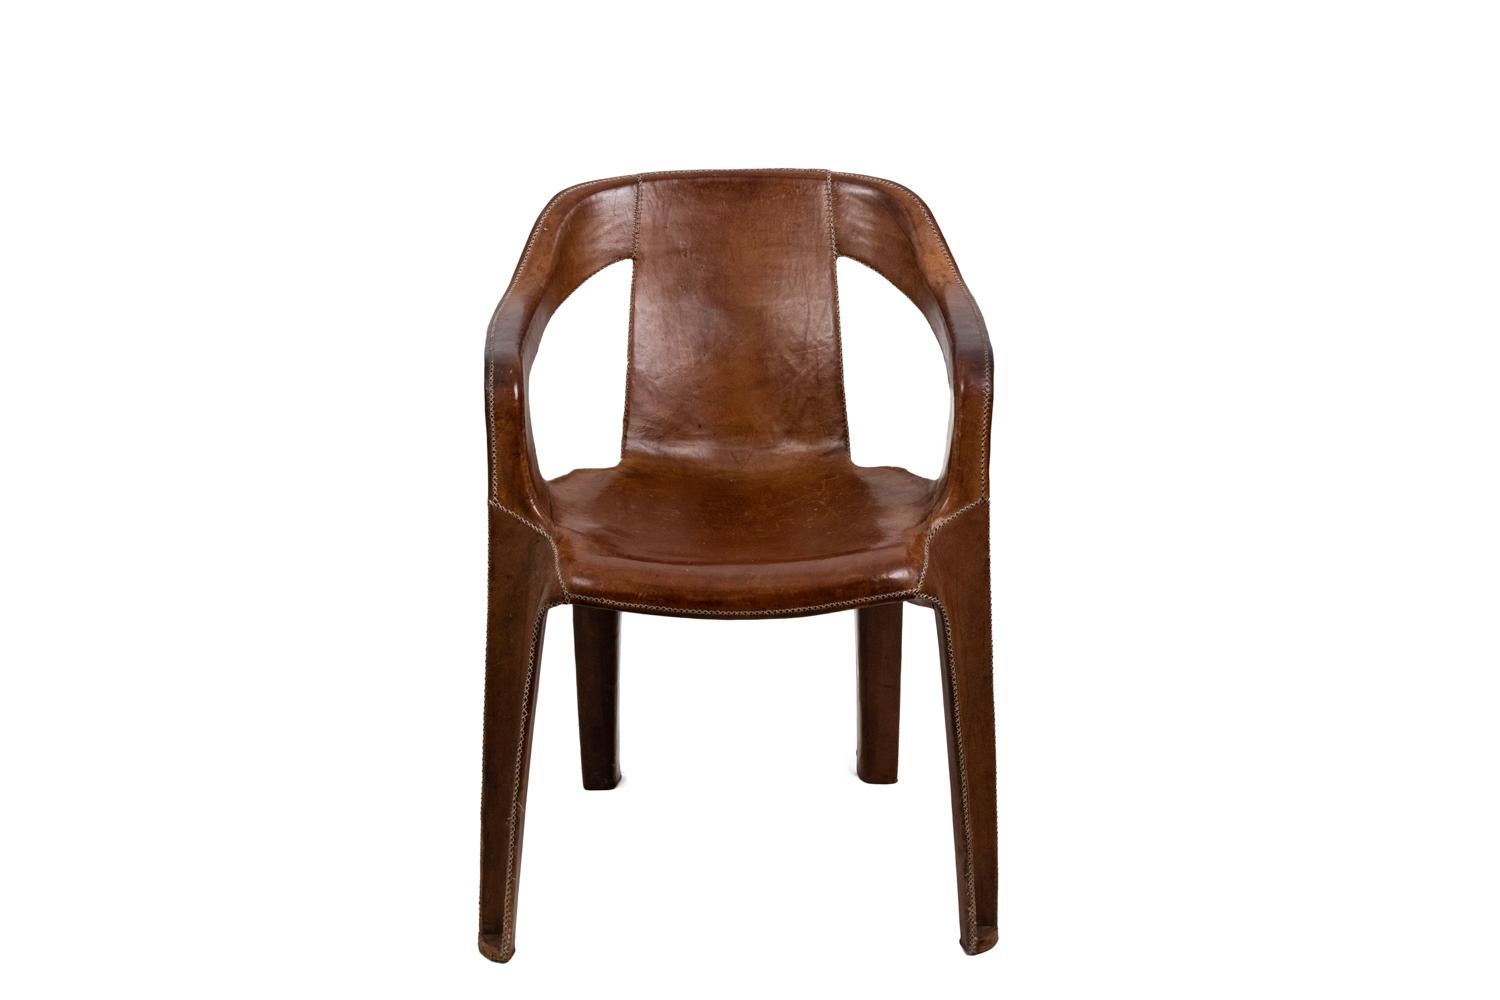 Sol&Luna, signed.
Armchair in brown leather with visible white sewings standing on a four legs forming angles. Seat slightly concave. Arms on the leg lines go up until the rectangular back.

Spanish contemporary work.

Leather slightly